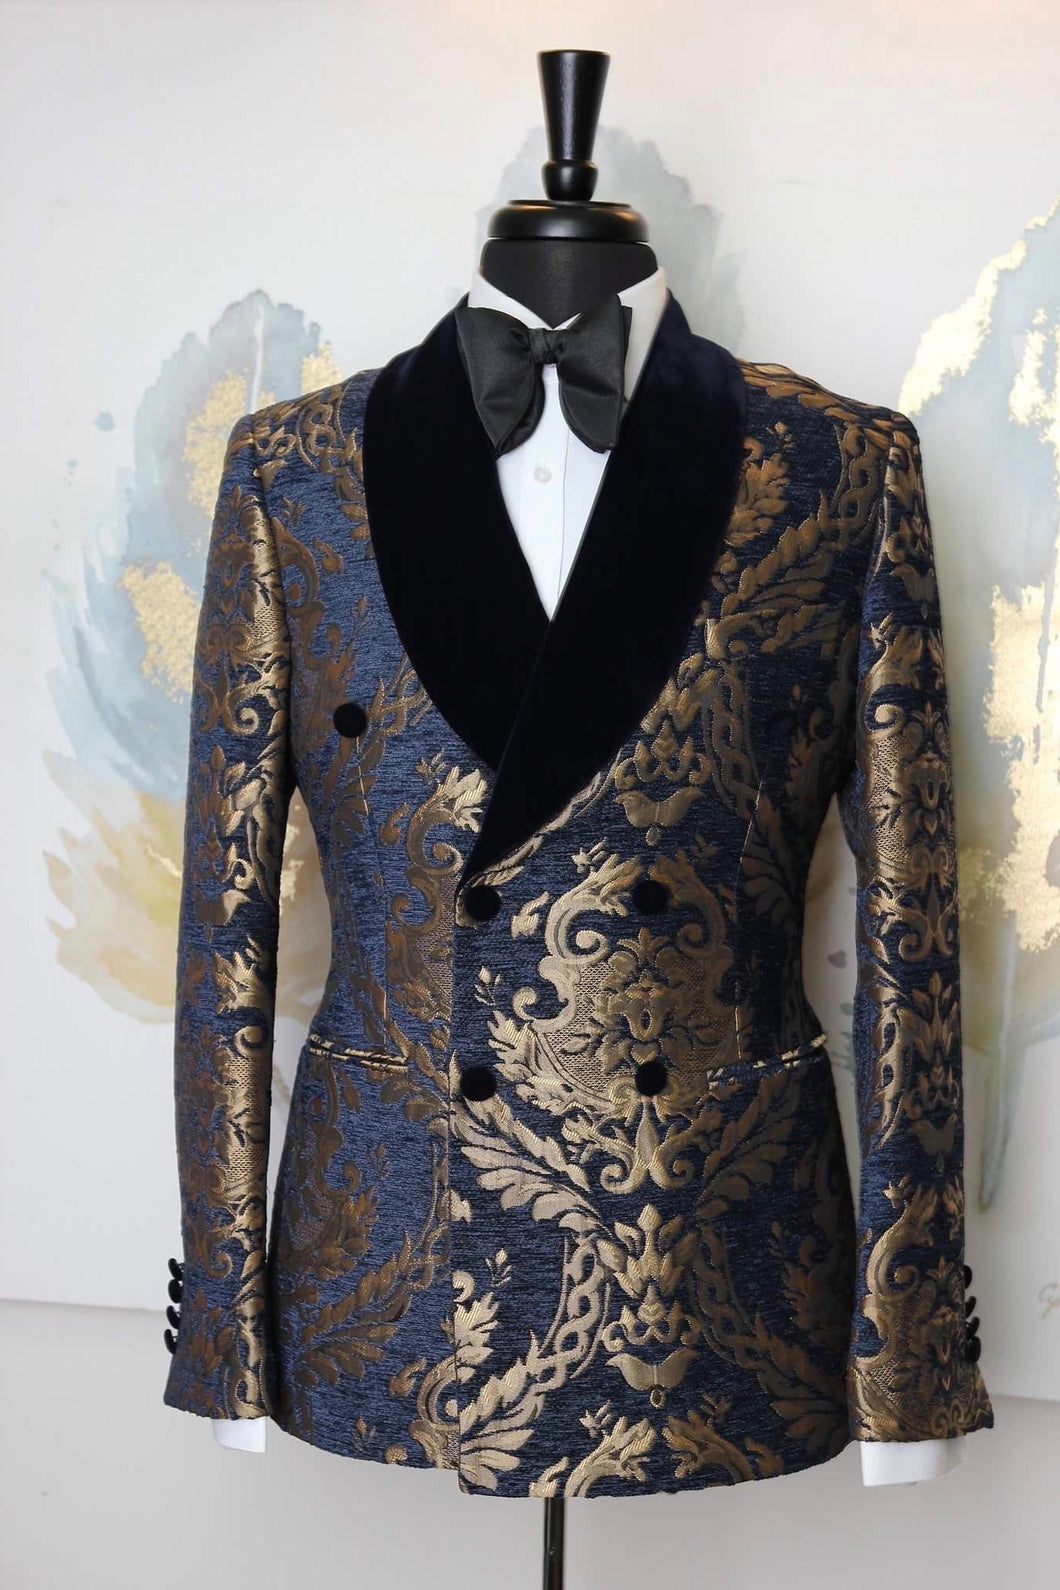 Men’s NAVY AND GOLD FLORAL TUXEDO